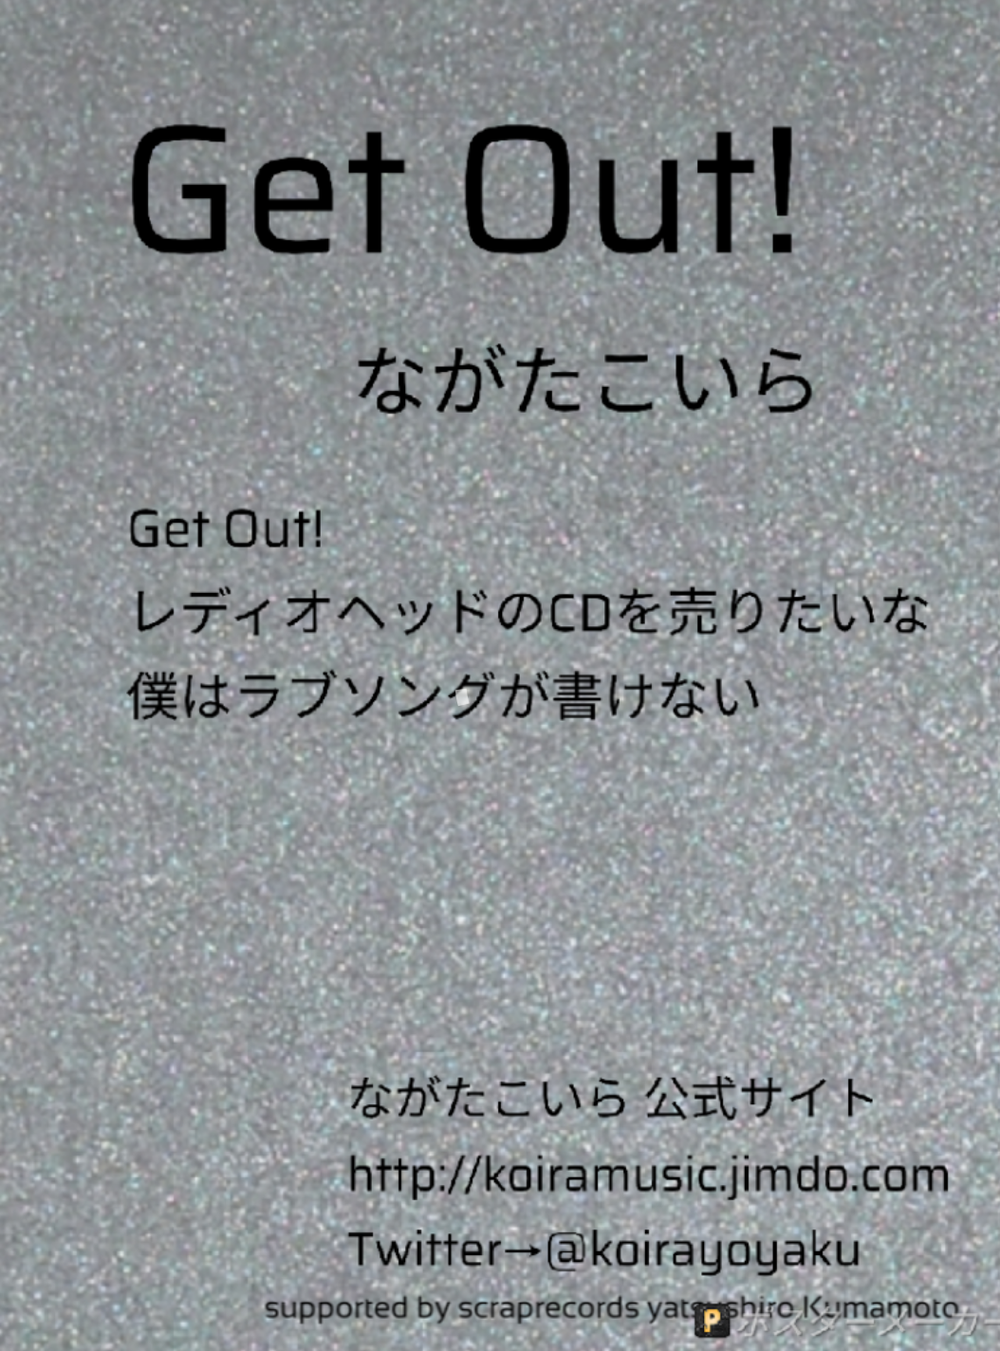 3rd maxi single「get out!」